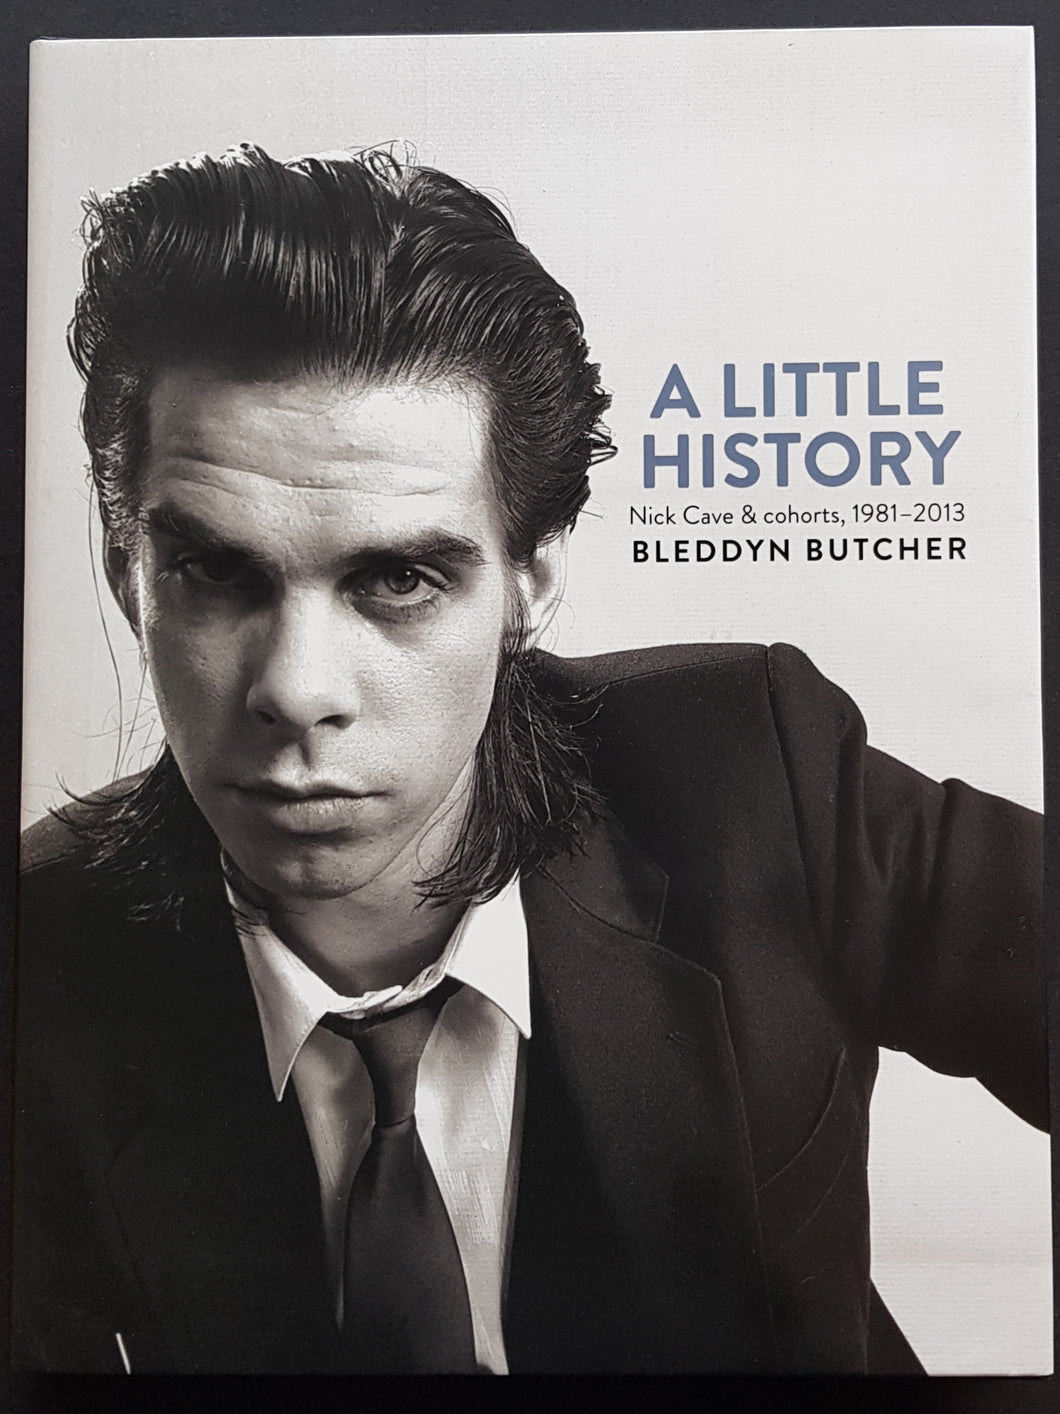 Nick Cave - A Little History Nick Cave & Cohorts, 1981-2013